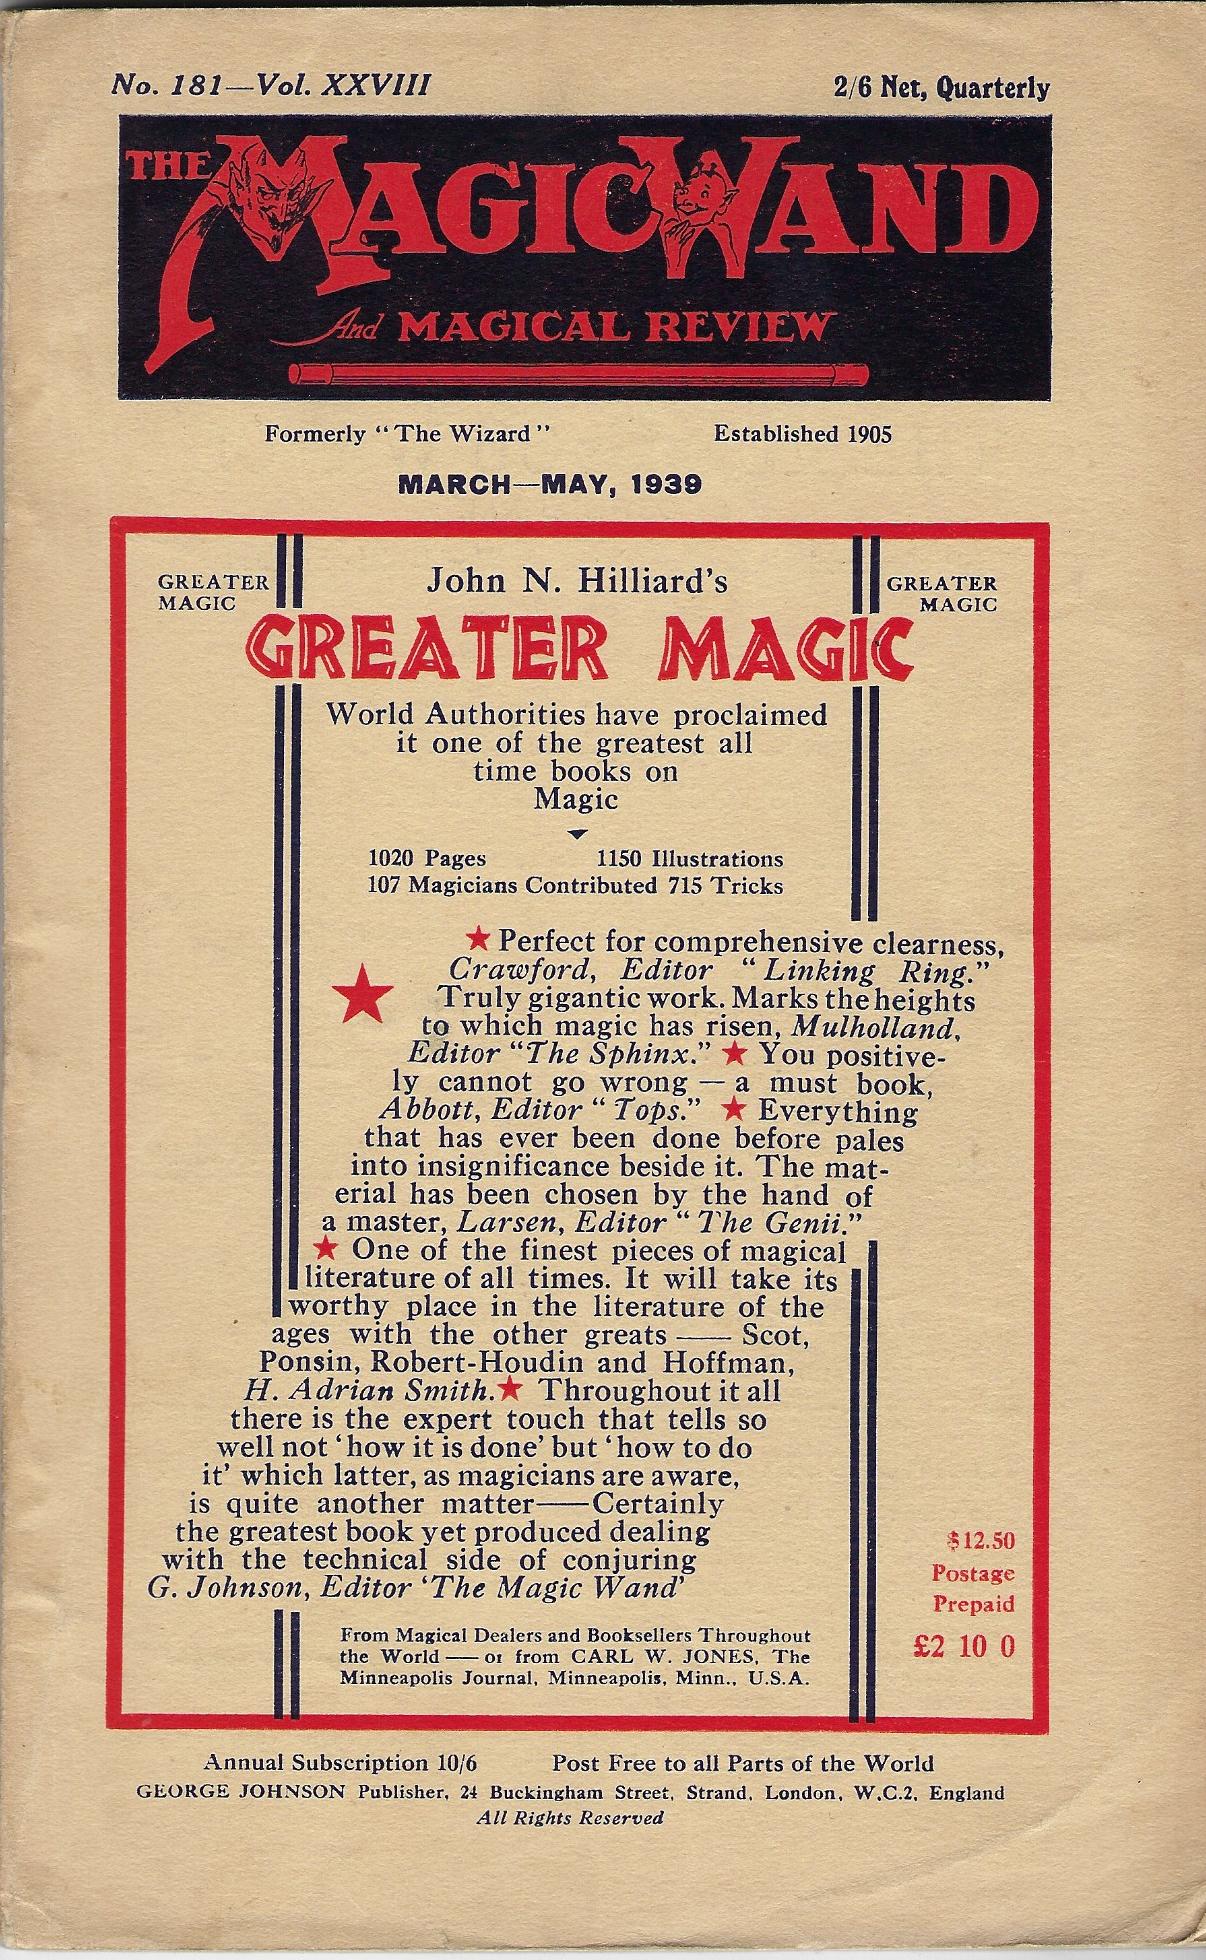 Image for The Magic Wand and Magical Review No181, Vol. XXVII, March - May1939